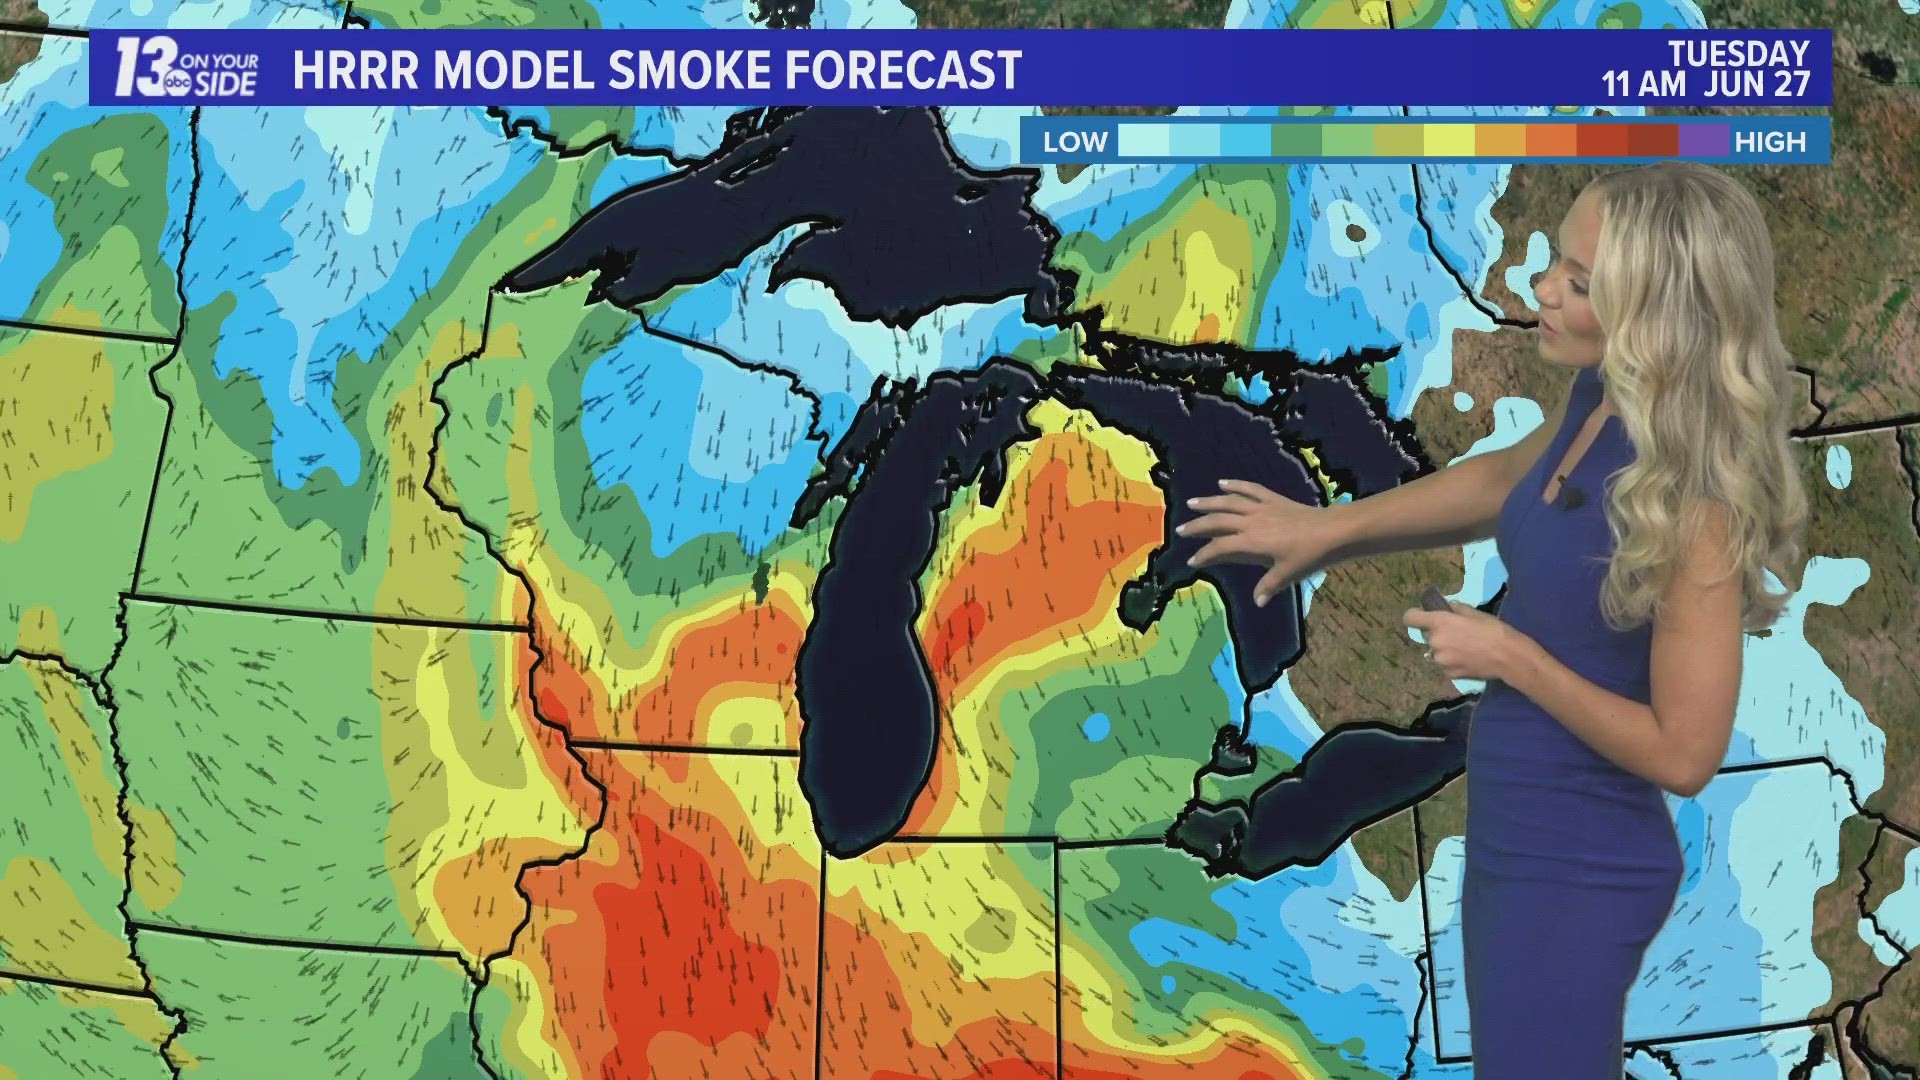 Experts are saying the air quality in West Michigan is the worst we've ever seen.